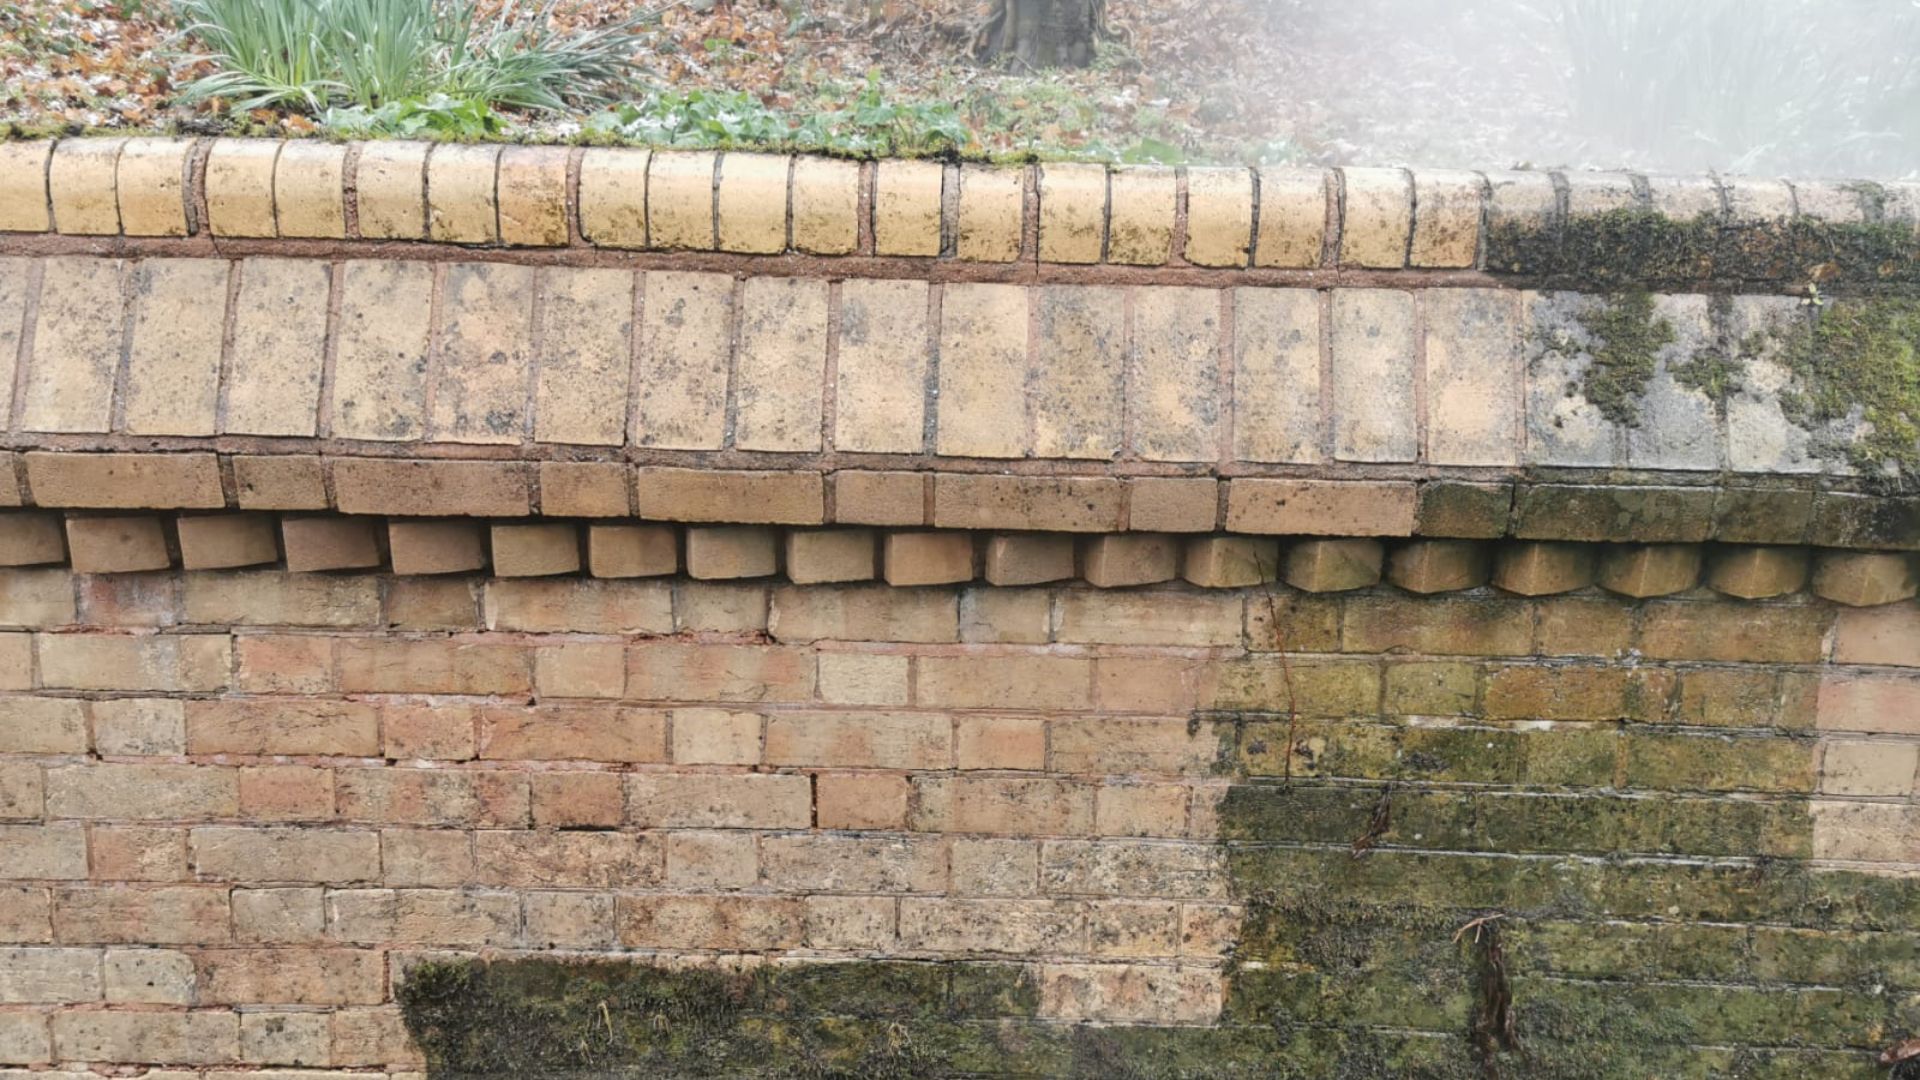 A partially clean brick wall to demonstrate teh effectiveness of Vinci Response's brick cleaning service.